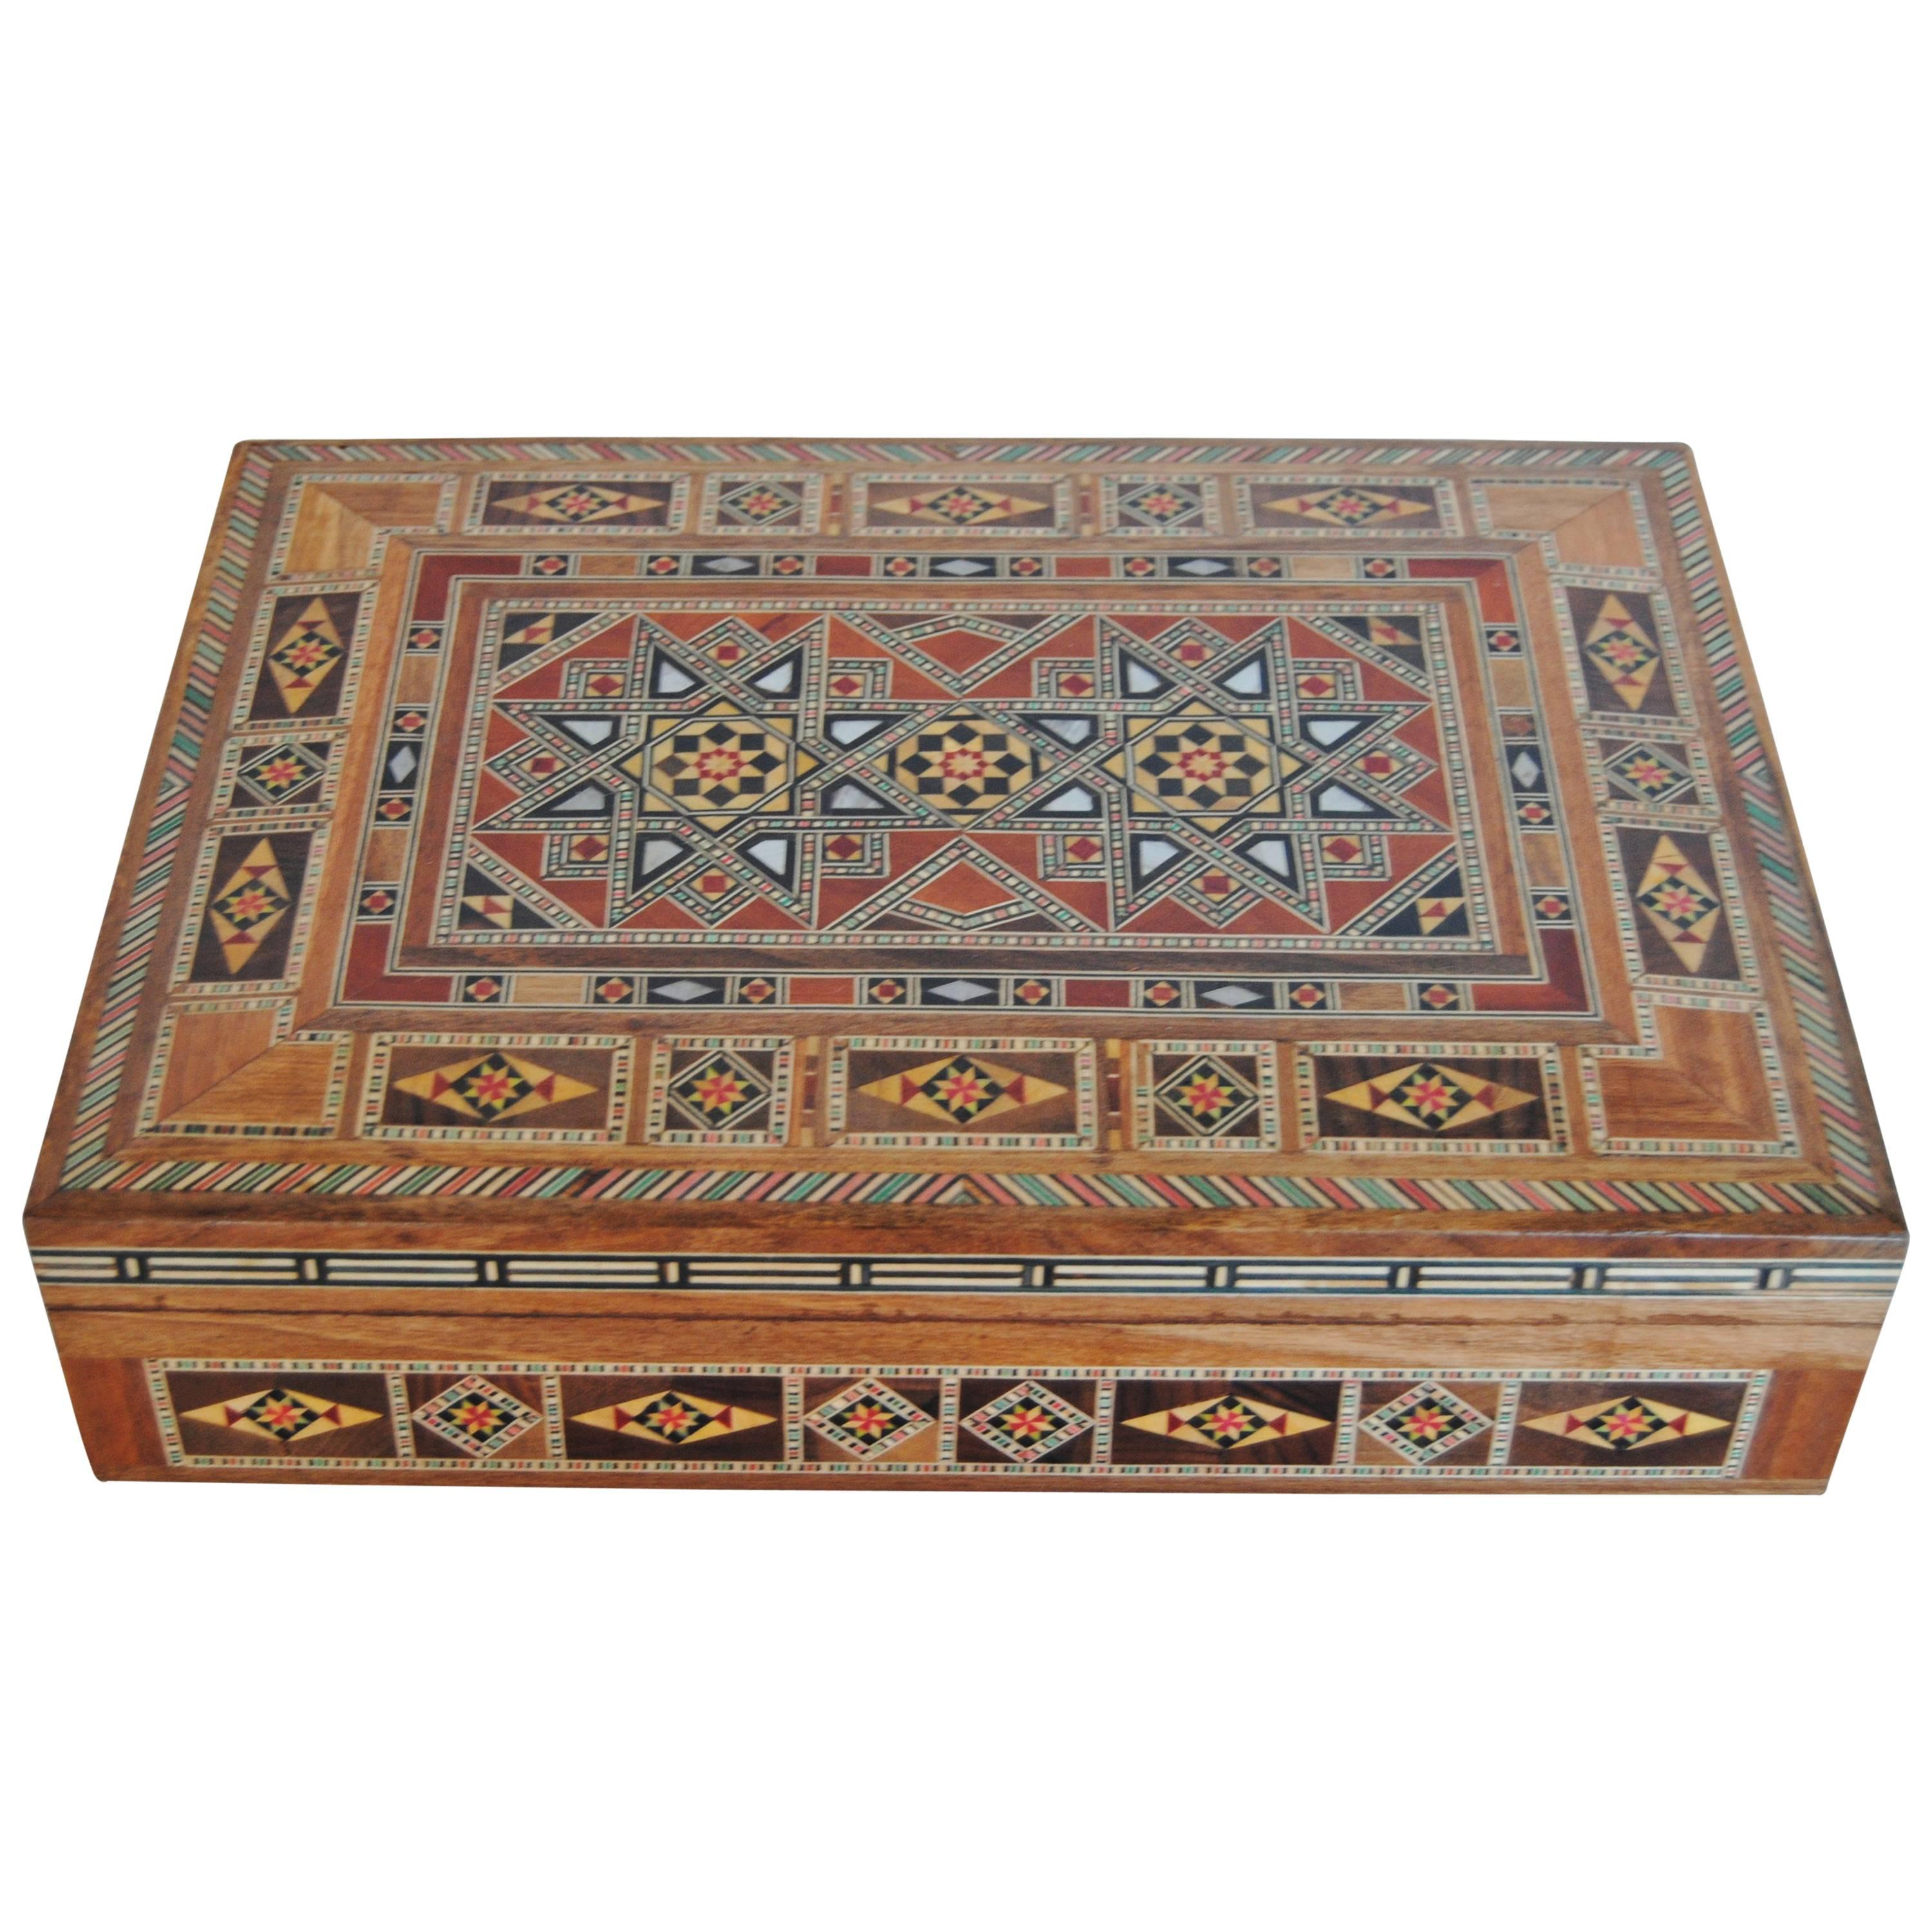 Handcrafted Syrian Walnut Wood Box with Mother-of-Pearl Inlay